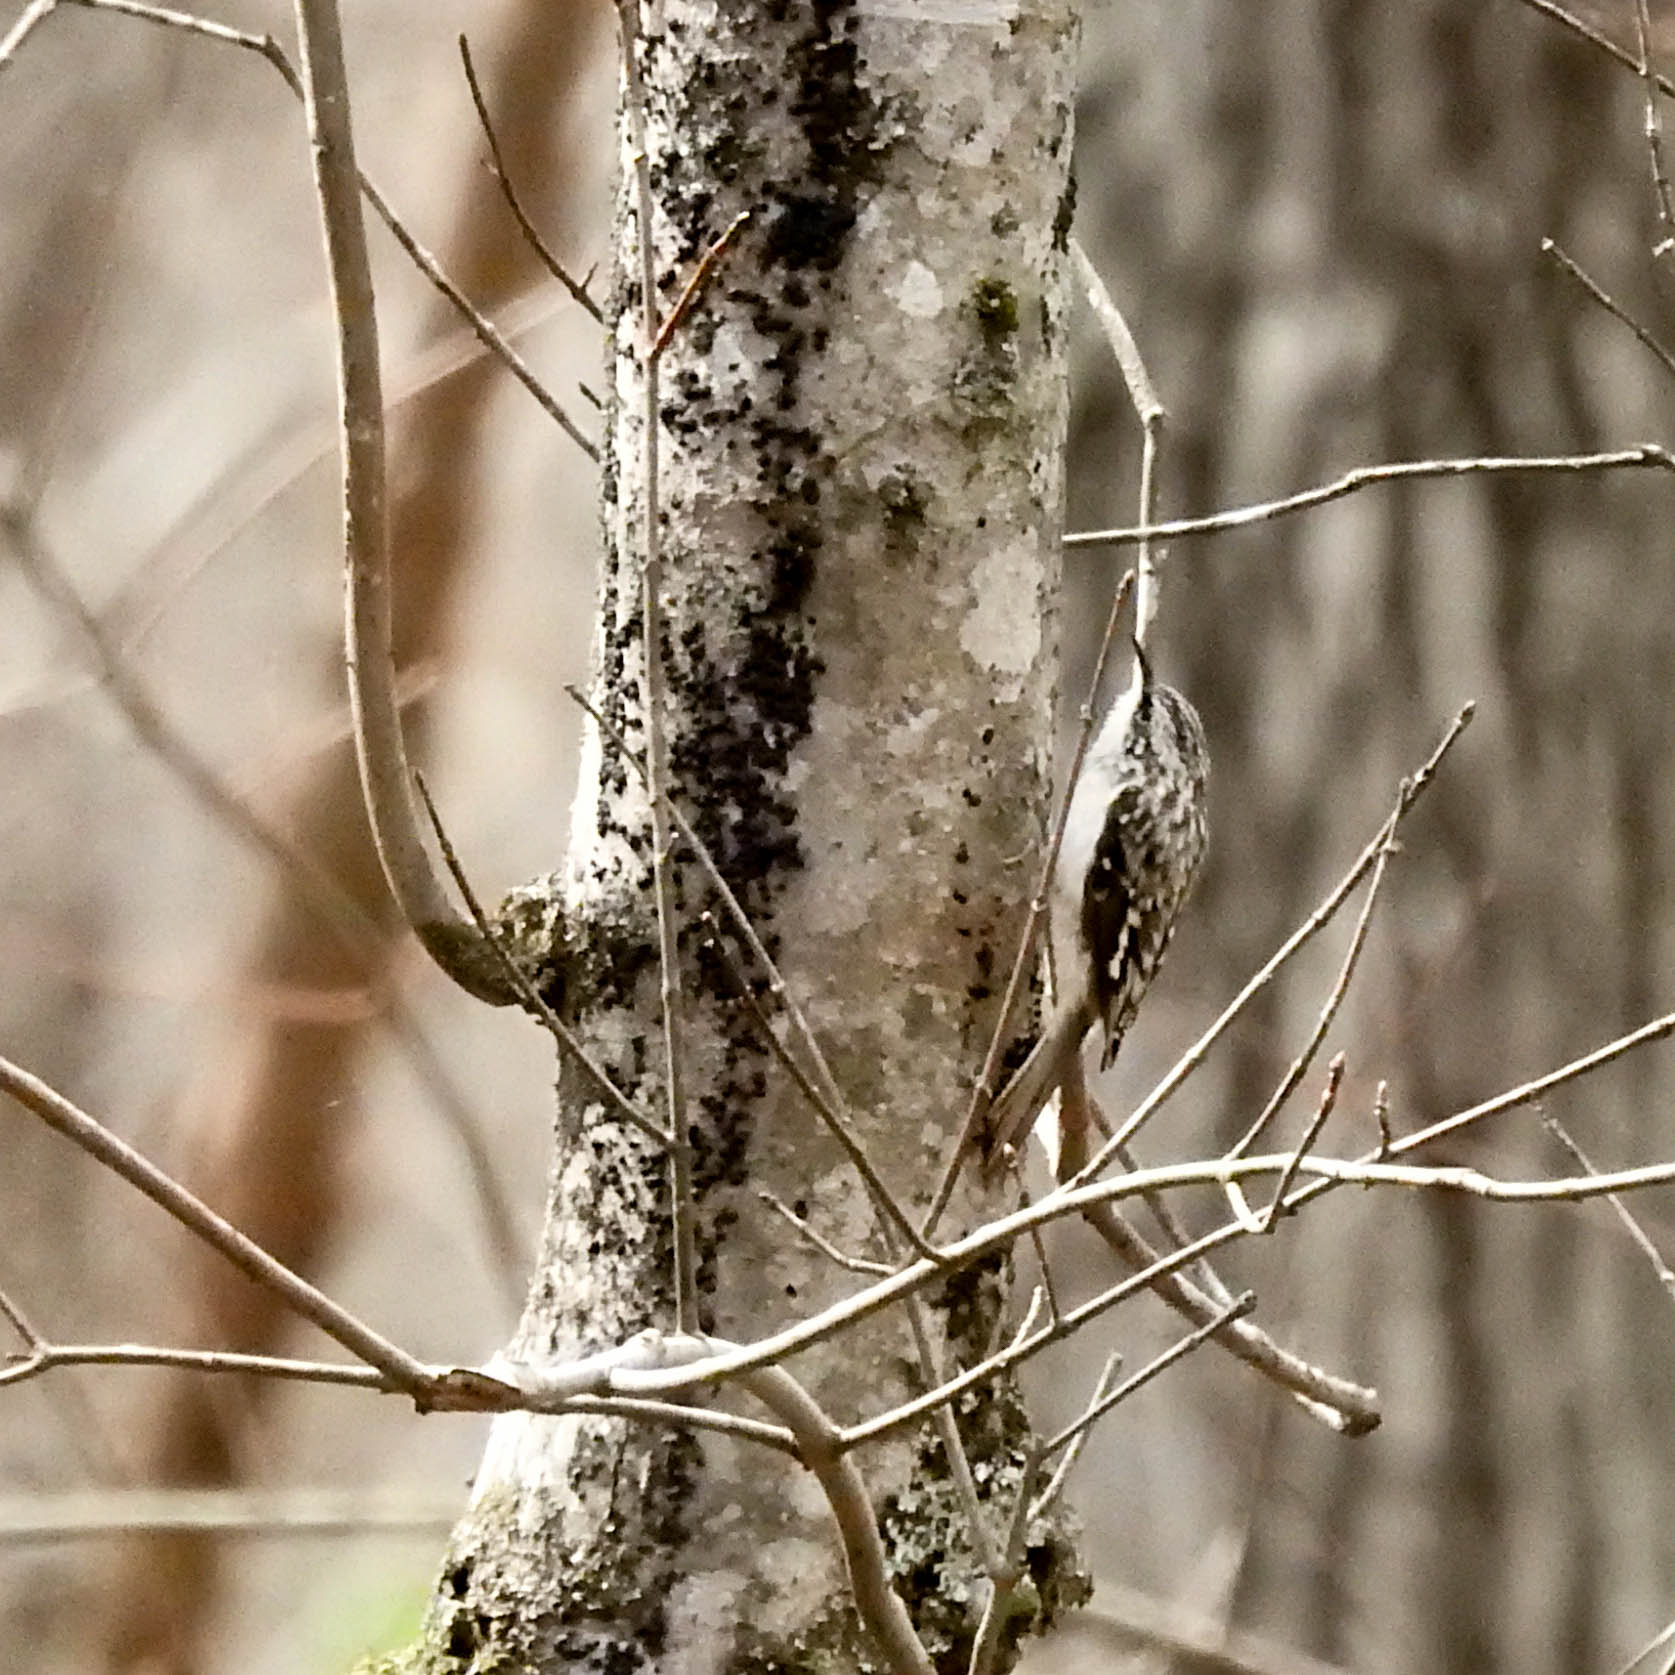 Brown Creeper, March 11, 2017